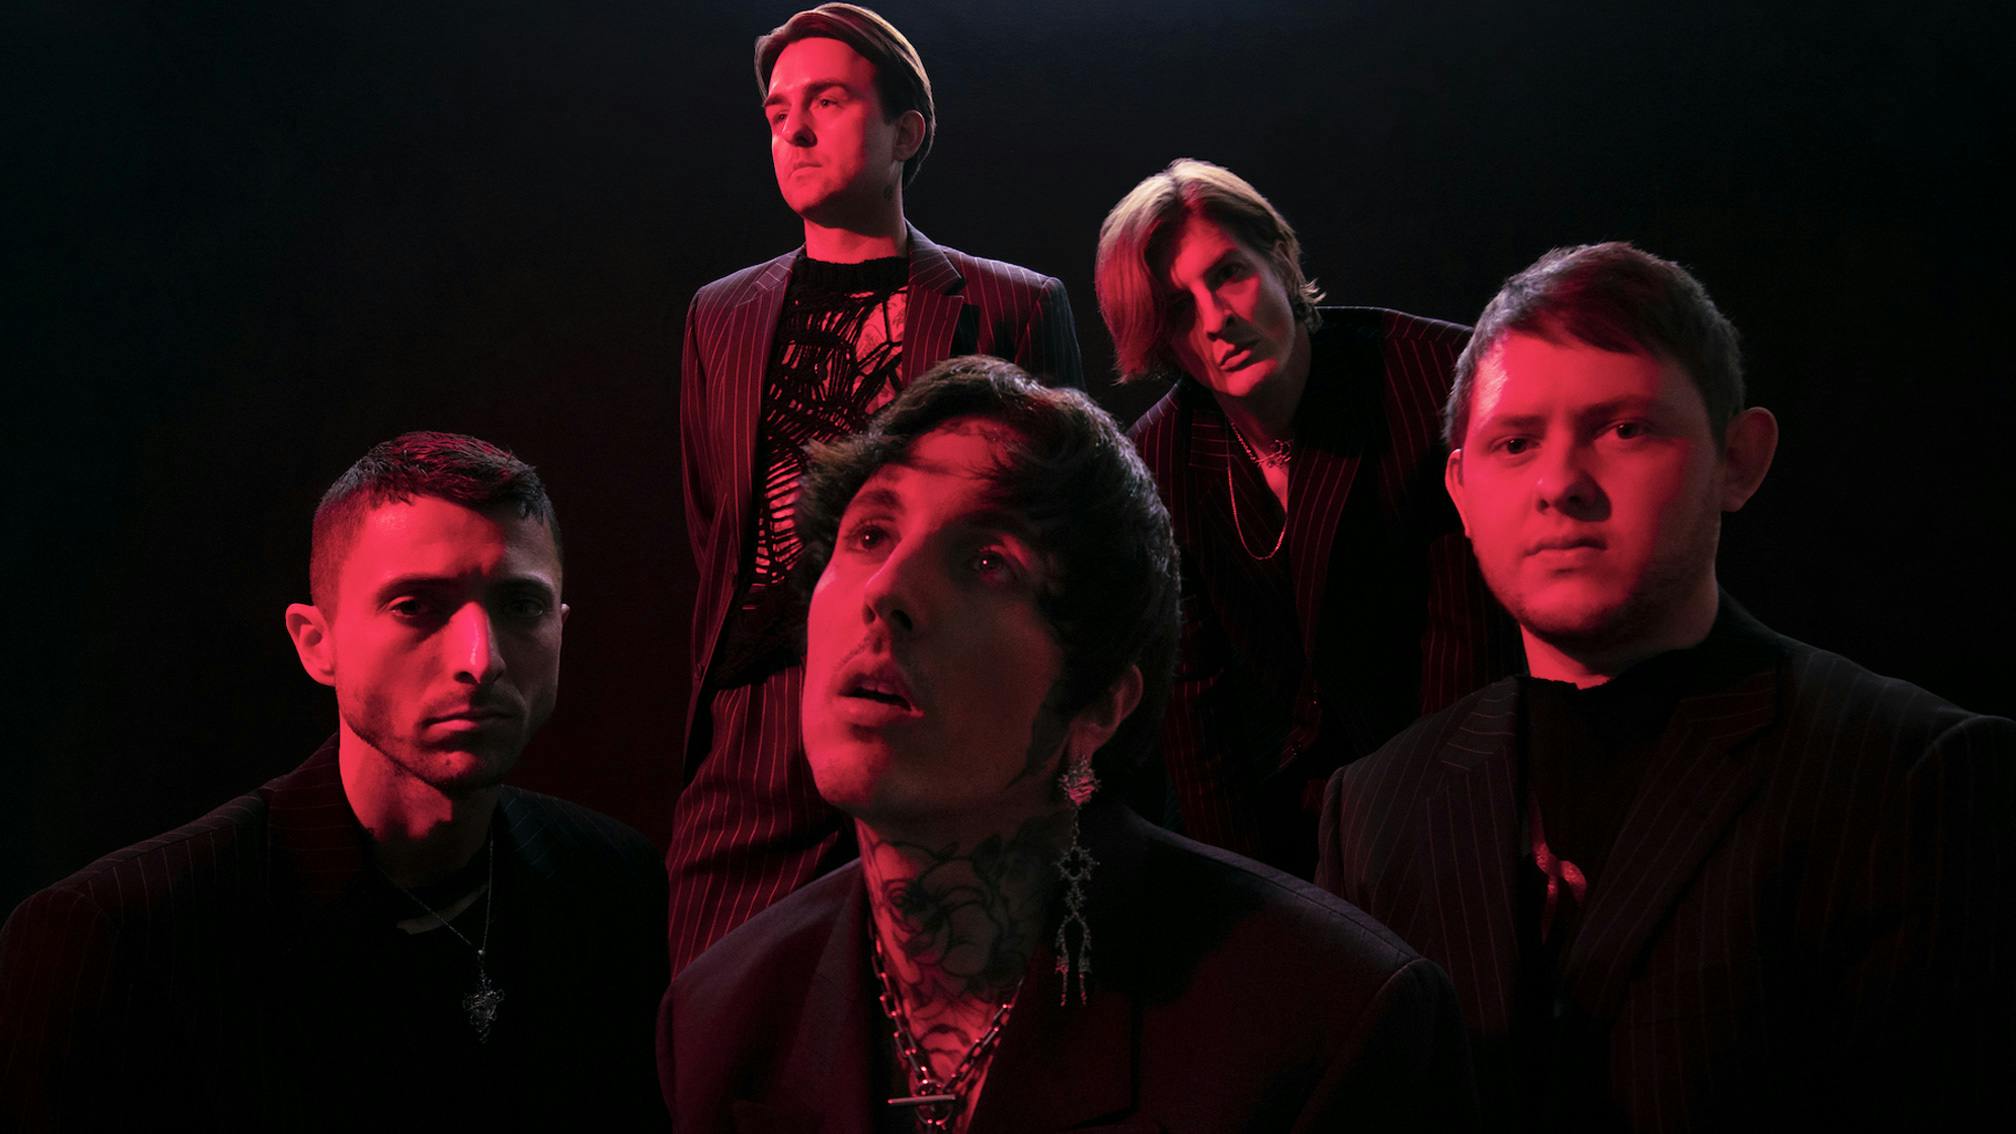 Bring Me The Horizon drop snippets of new music in latest tour video